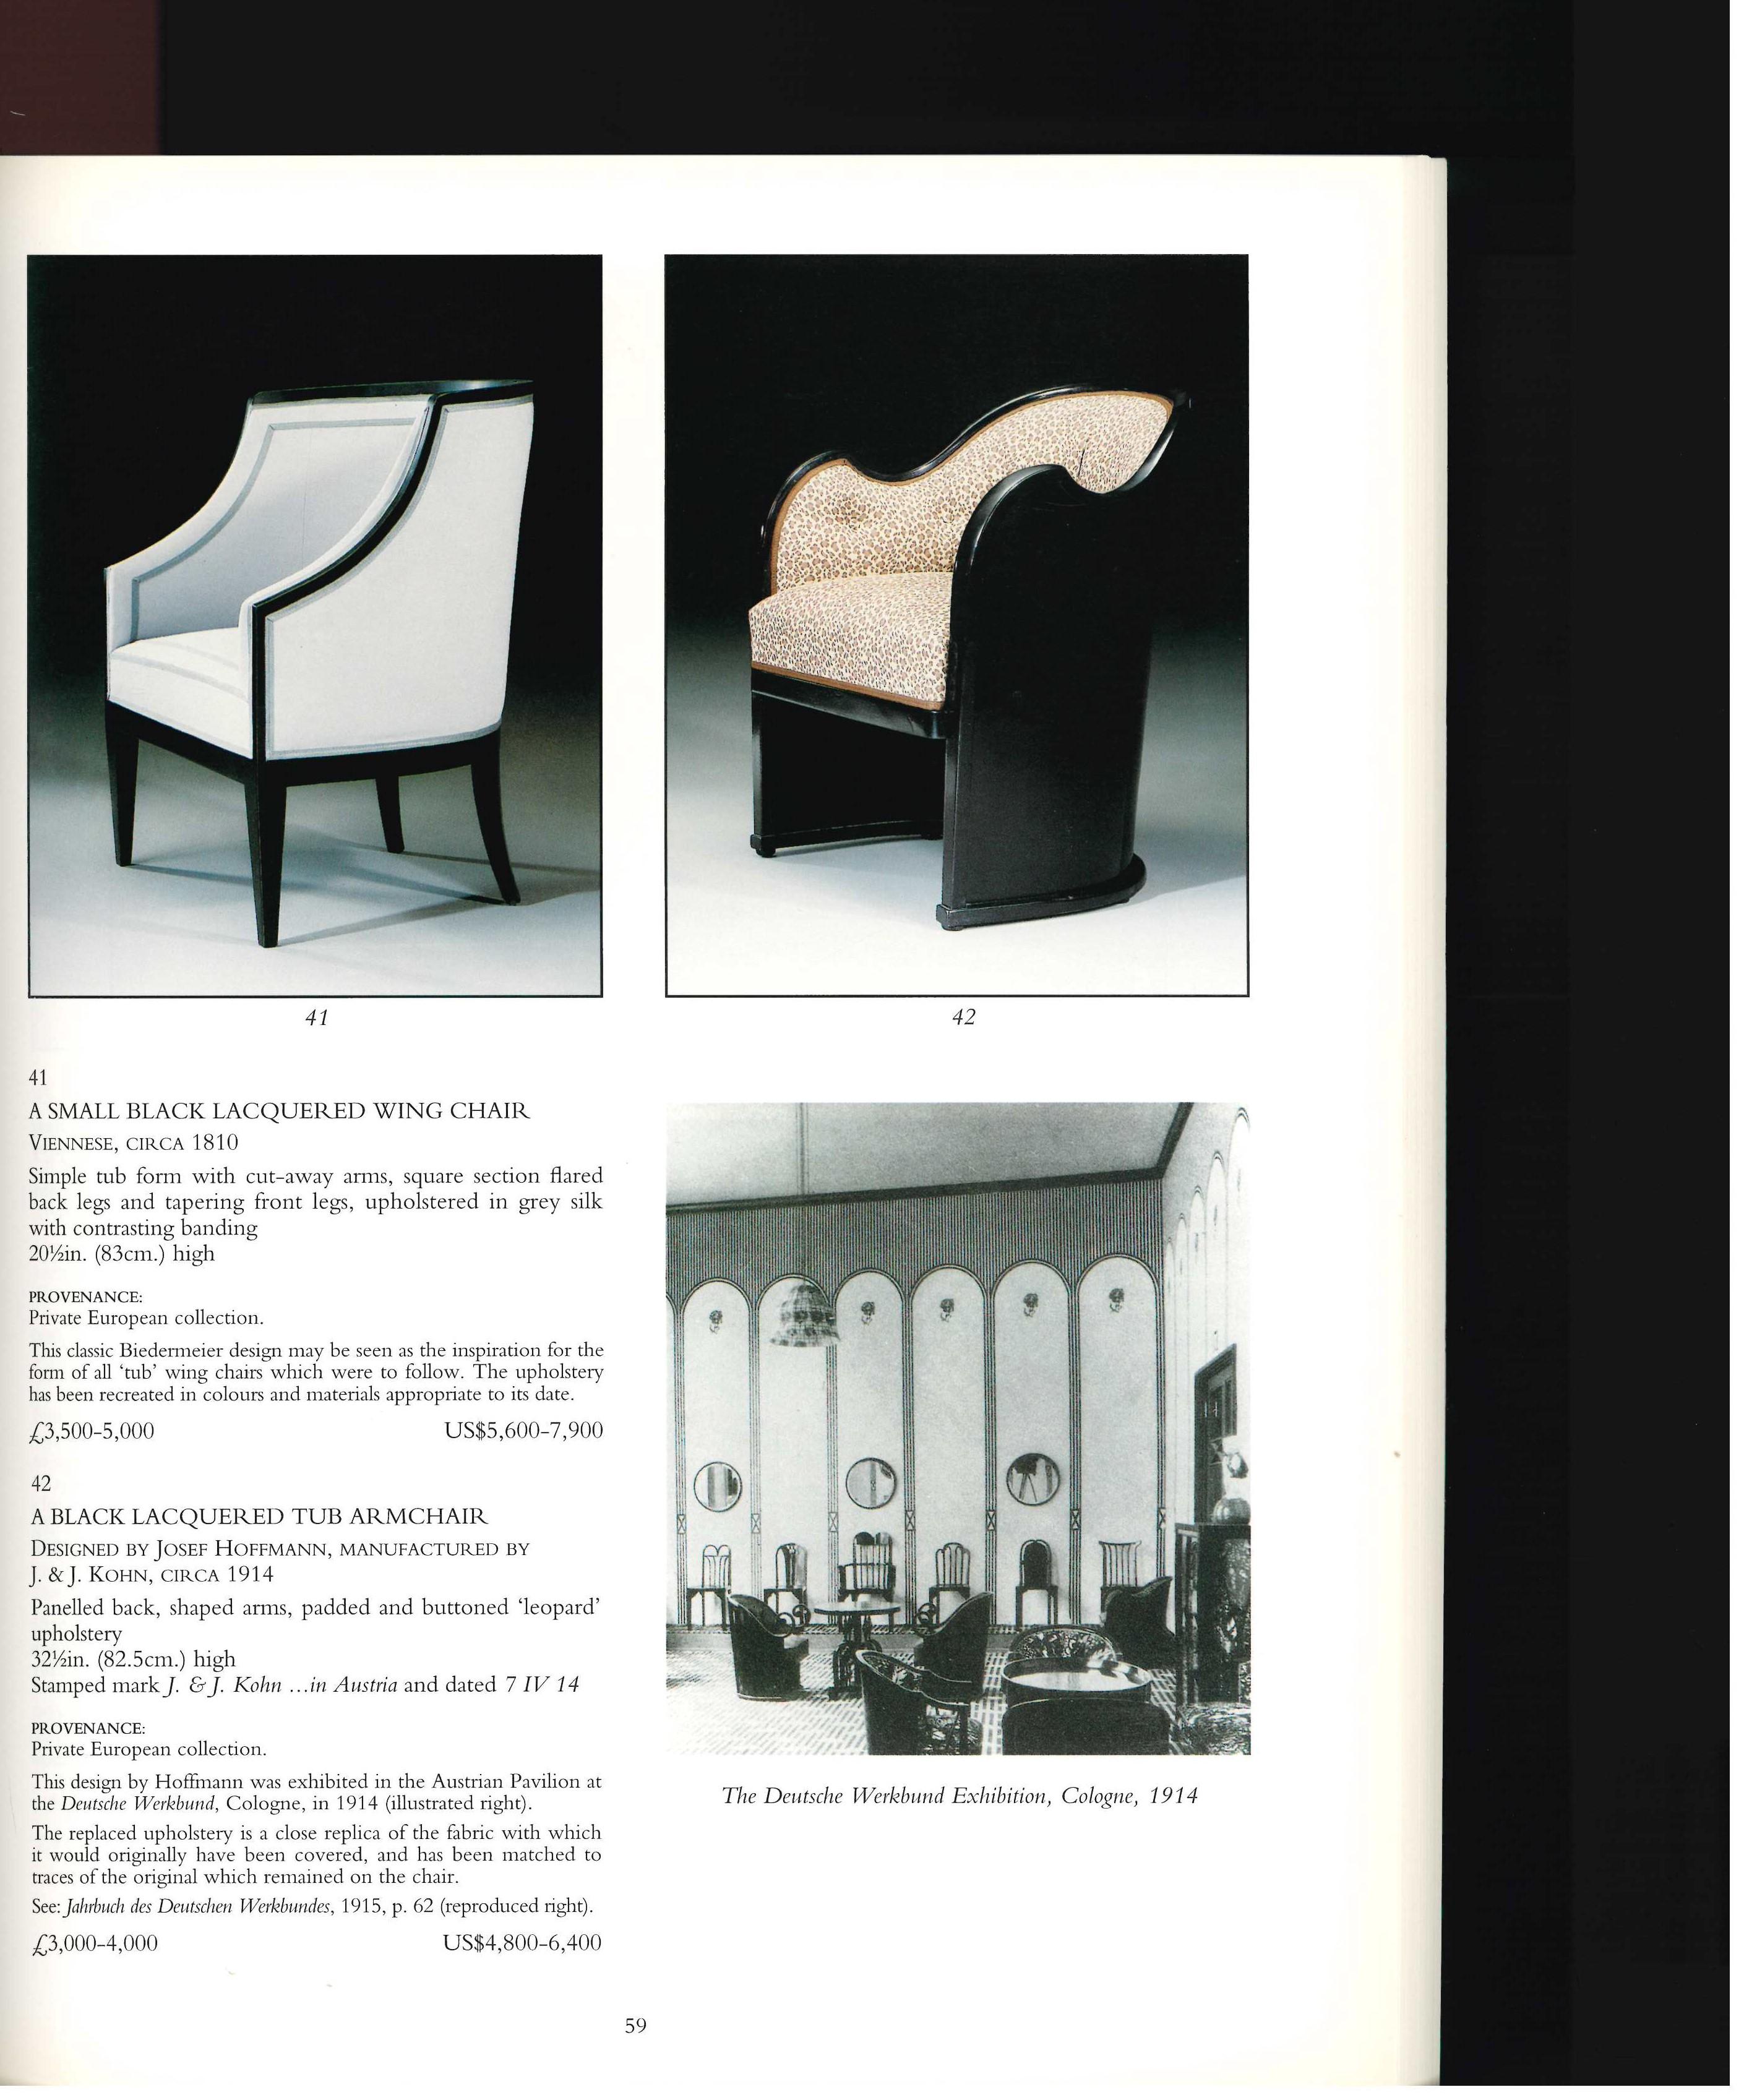 THE CHAIR, Christie's Auction Catalogue 29 October 1997 1